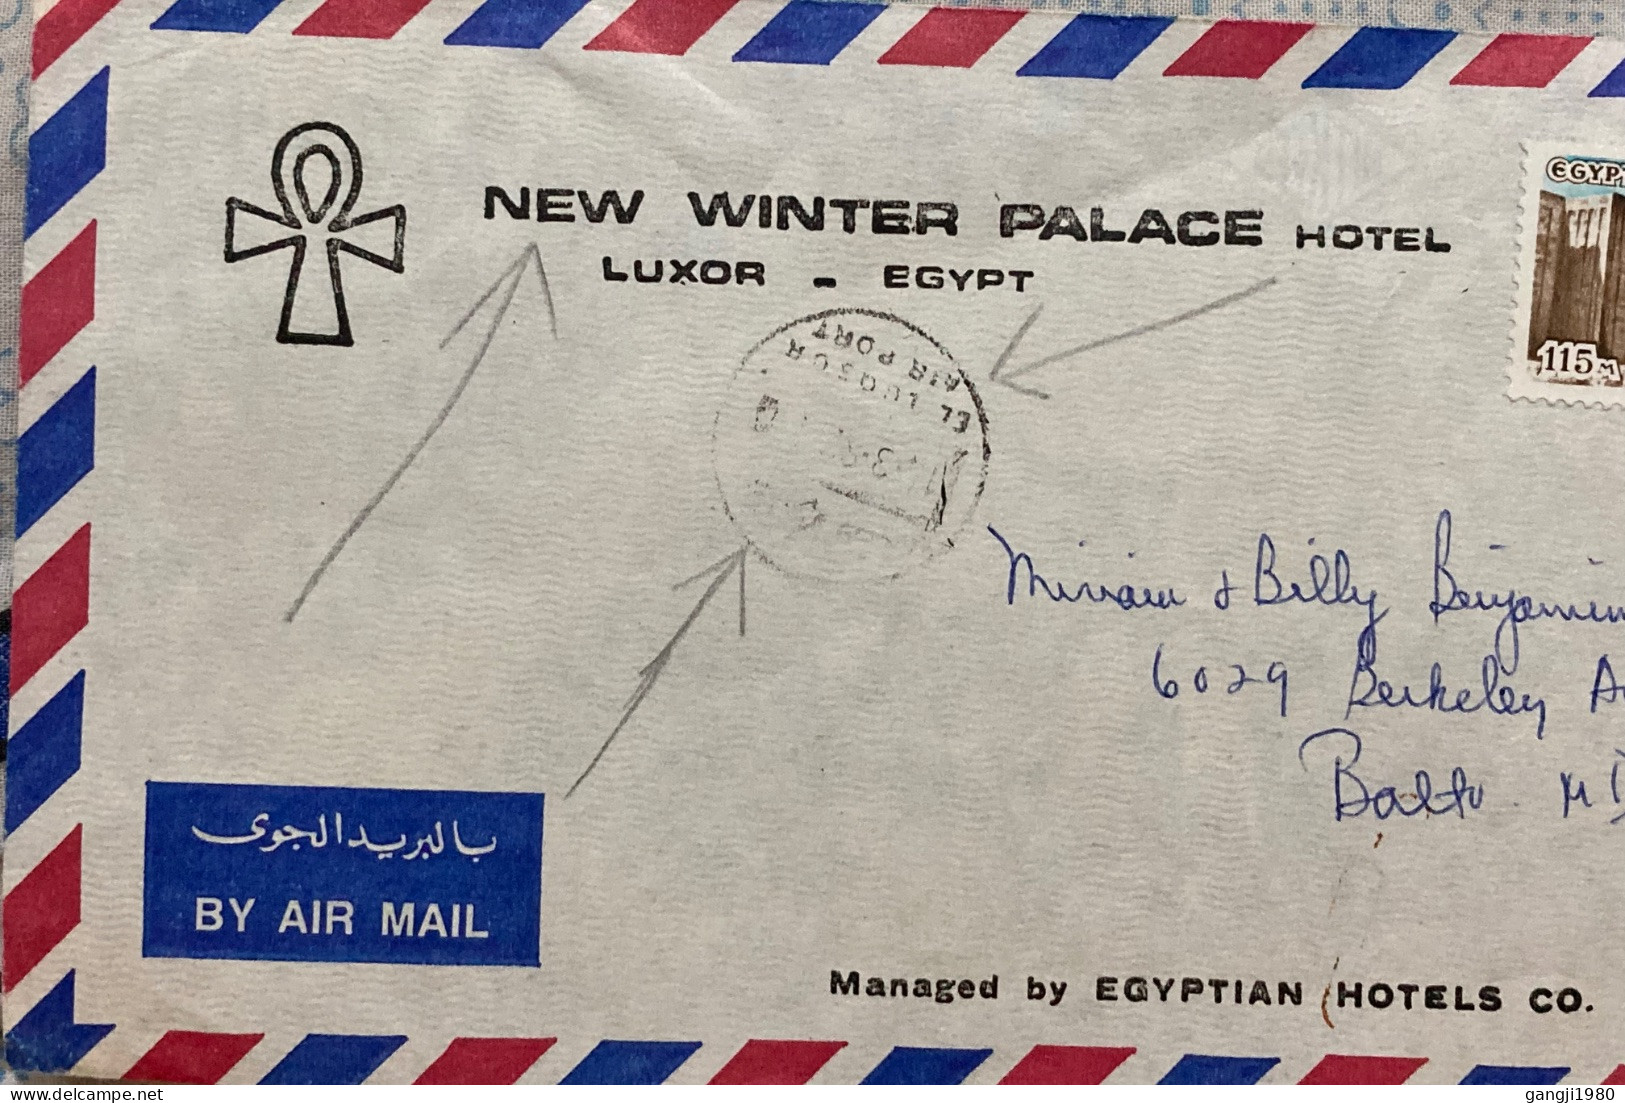 EGYPT 1980, COVER USED TO USA, NEW WINTER PALACE HOTEL, LUXOR, 2 STAMP, PYRAMID, AEROPLANE, ARCHELOGY, BUILDING, HERITAG - Brieven En Documenten